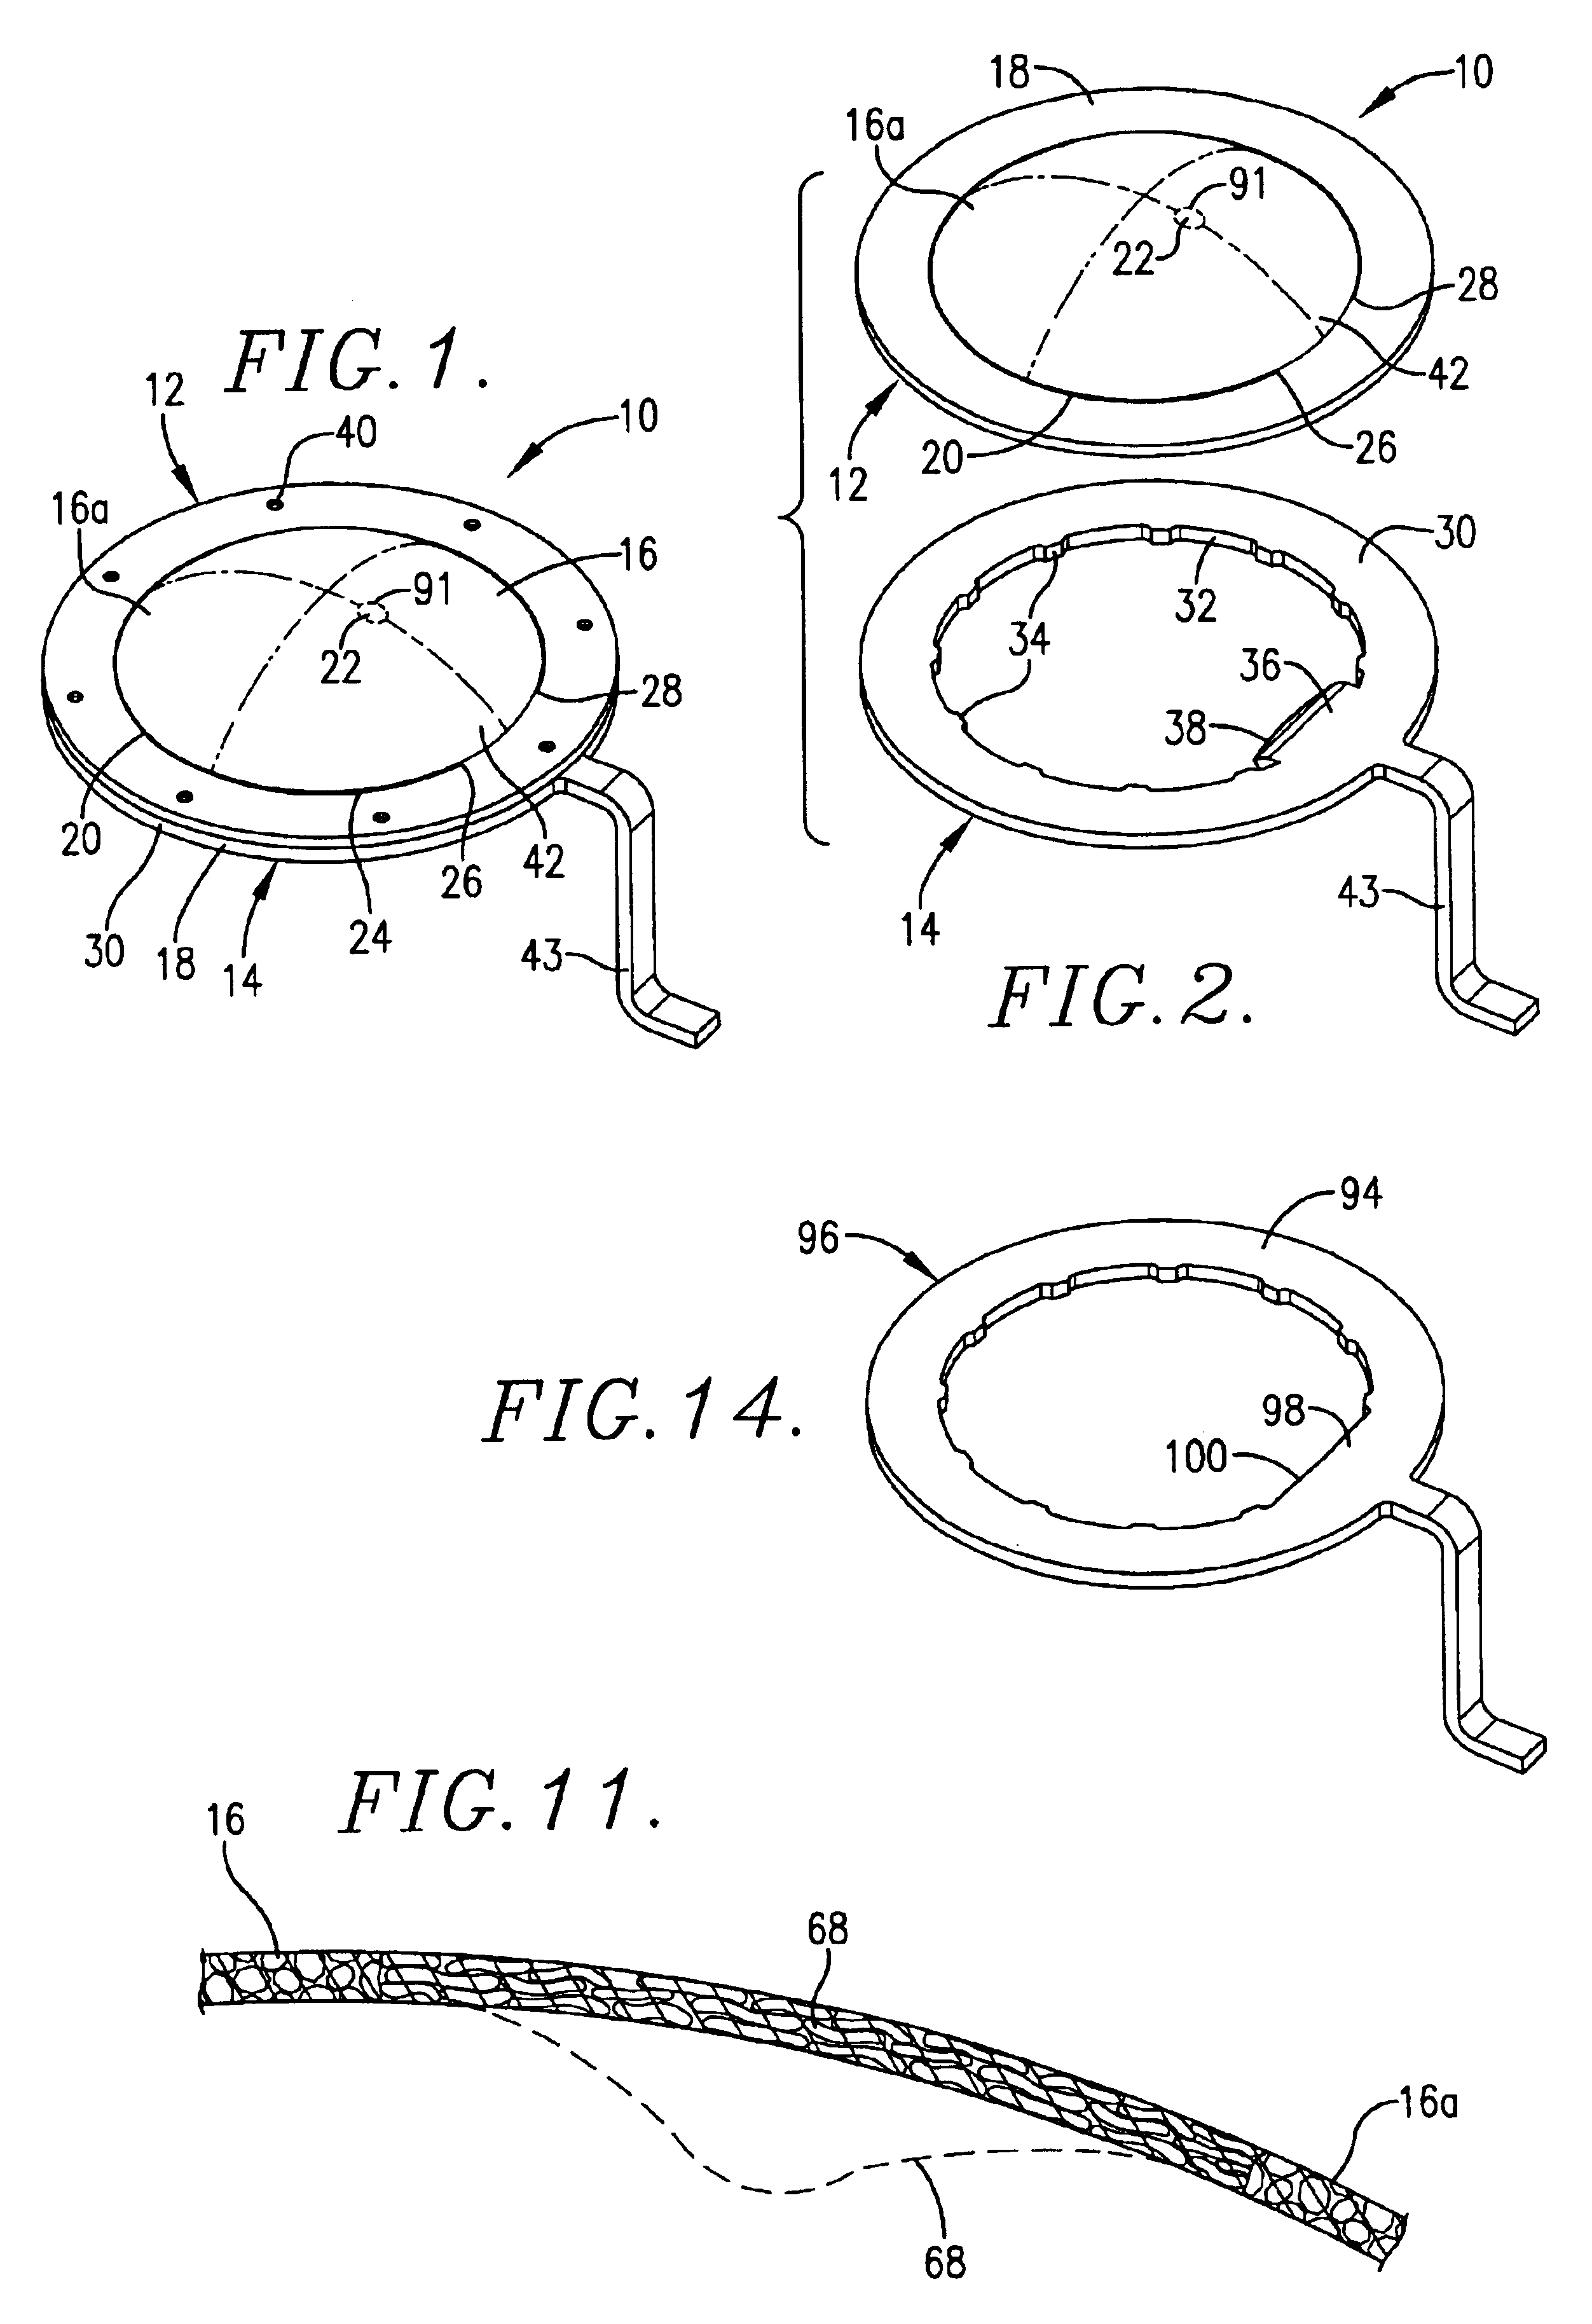 Reverse buckling sanitary rupture disc assembly